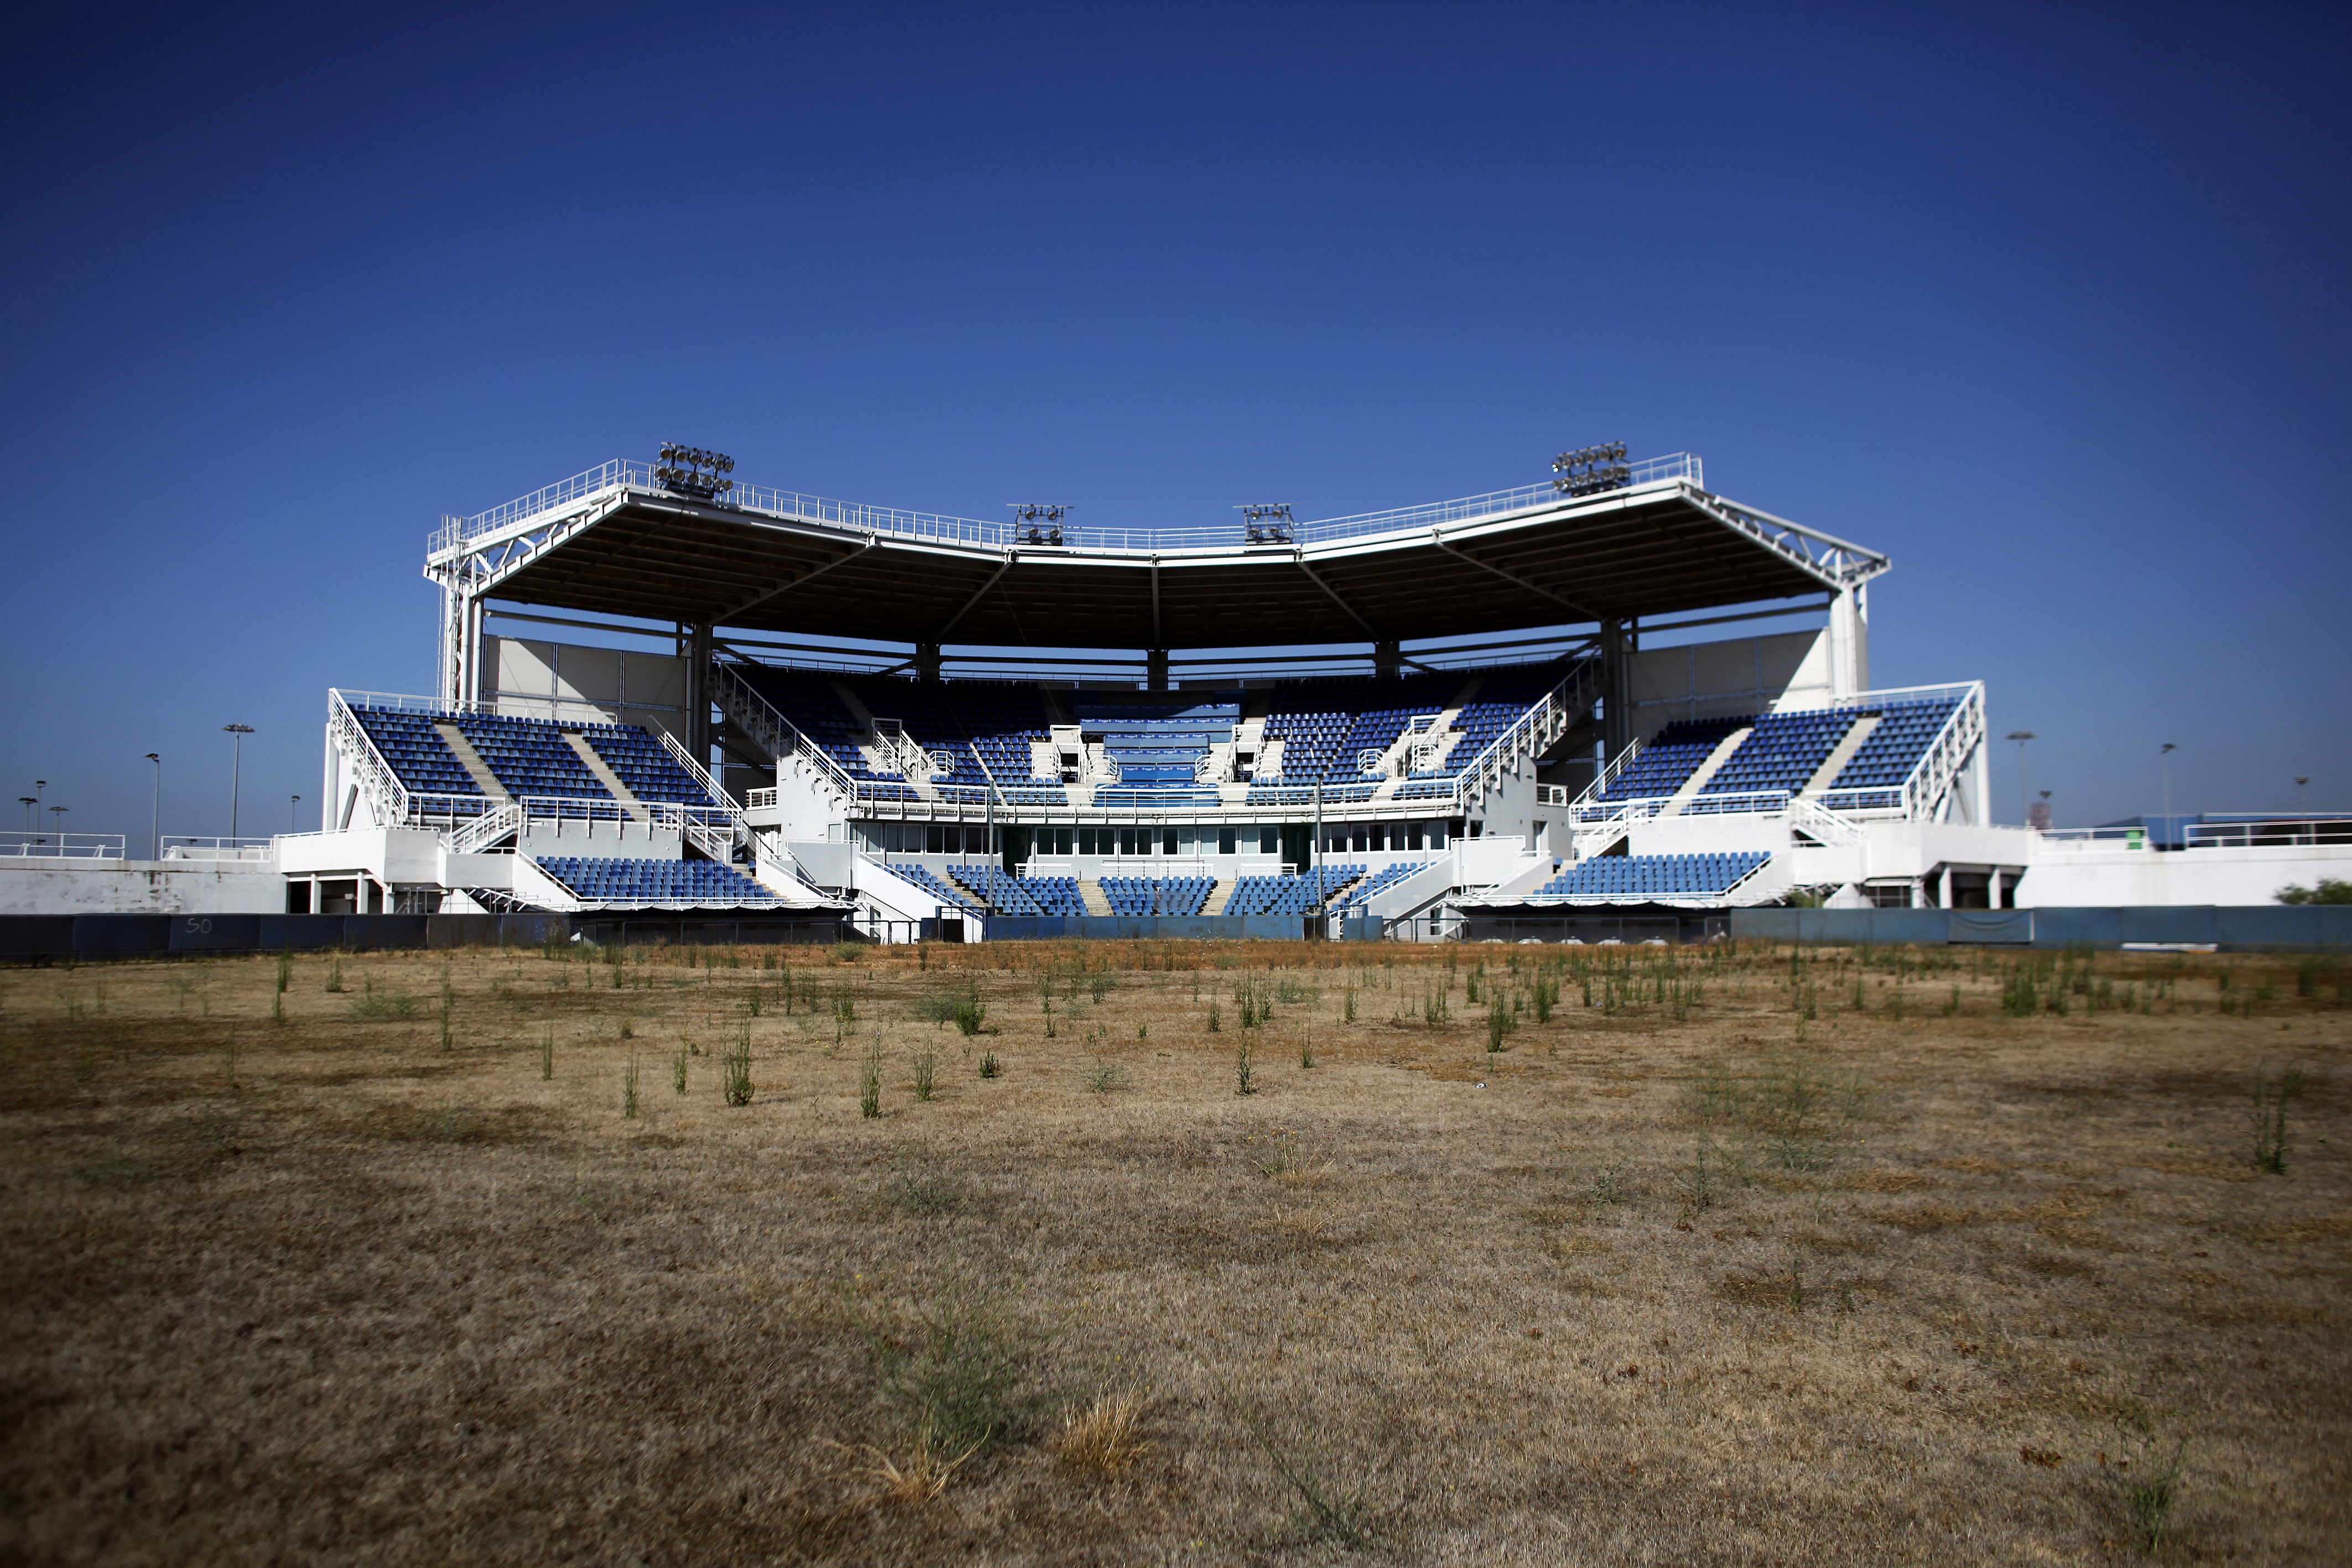 An abandoned softball stadium in Greece – a leftover from the 2004 Olympics.